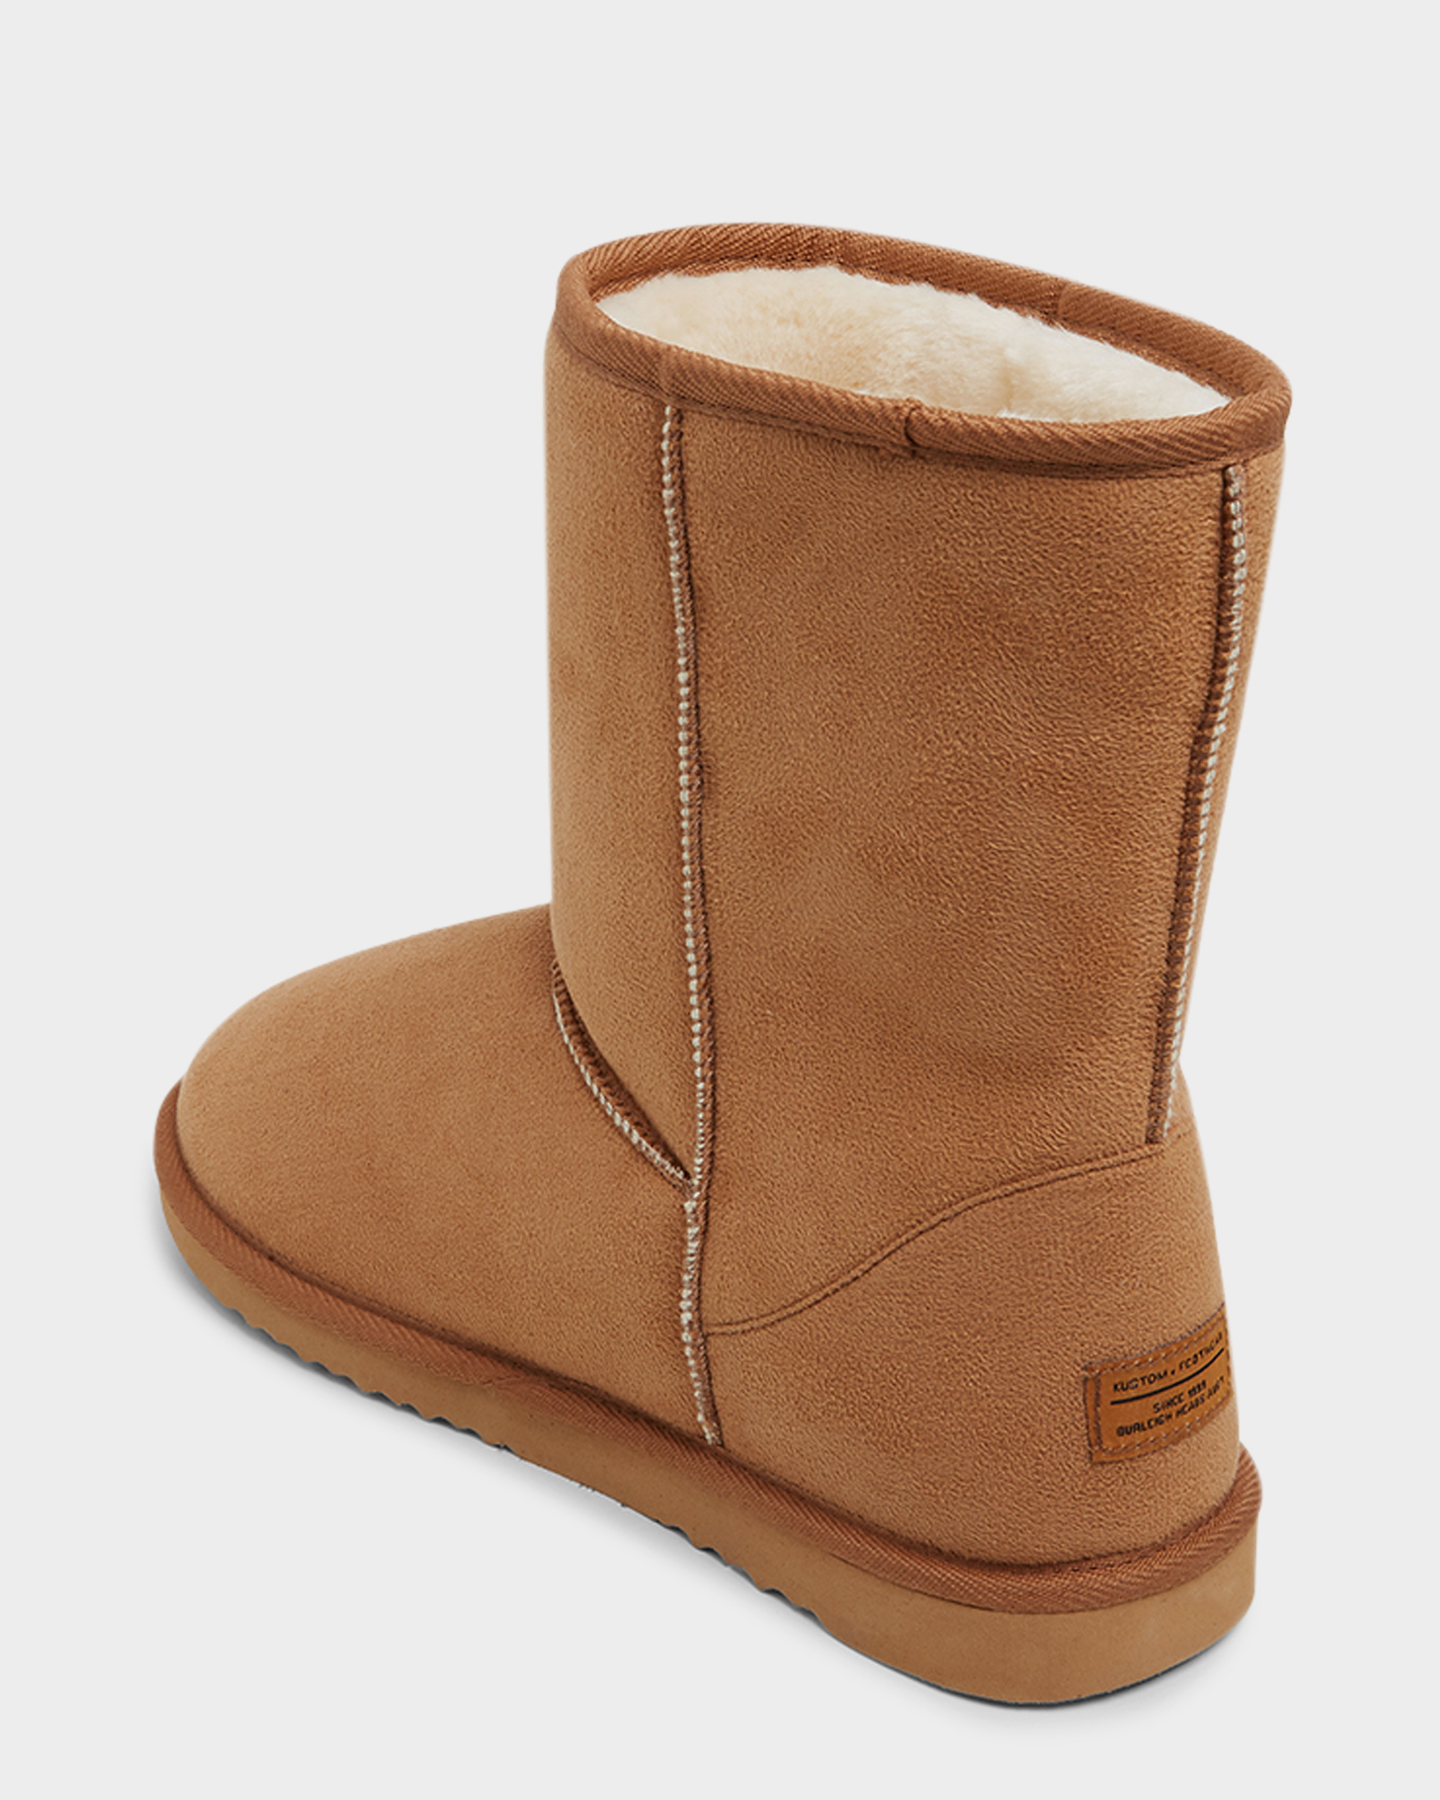 Custom UGG boots - clothing & accessories - by owner - apparel sale -  craigslist